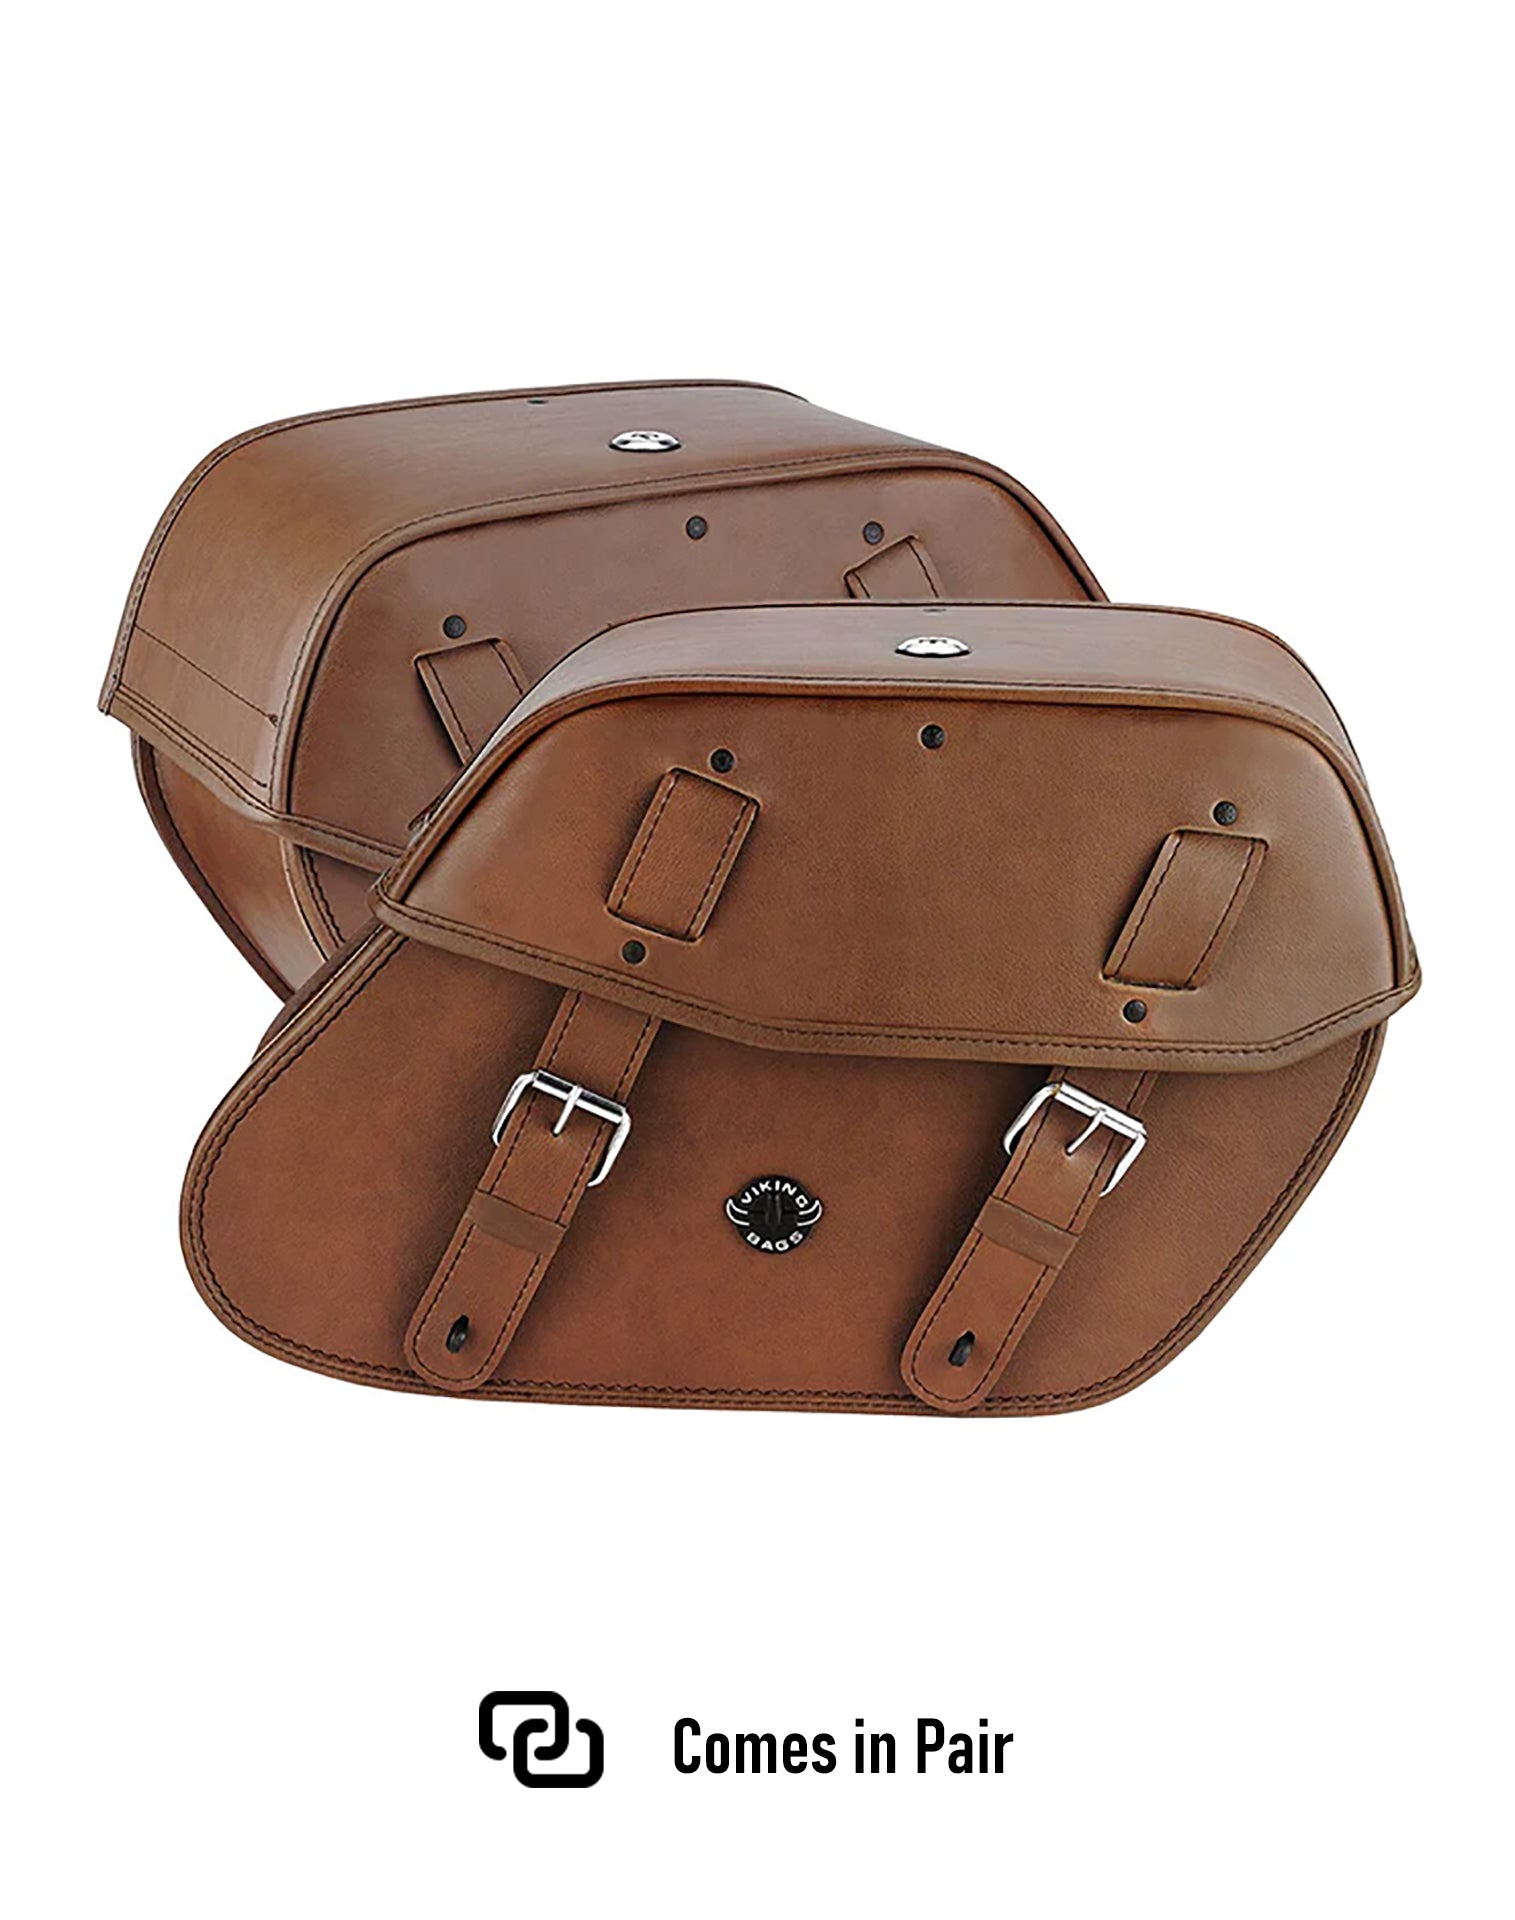 Viking Odin Brown Large Kawasaki Mean Streak 1600 Leather Motorcycle Saddlebags Weather Resistant Bags Comes in Pair